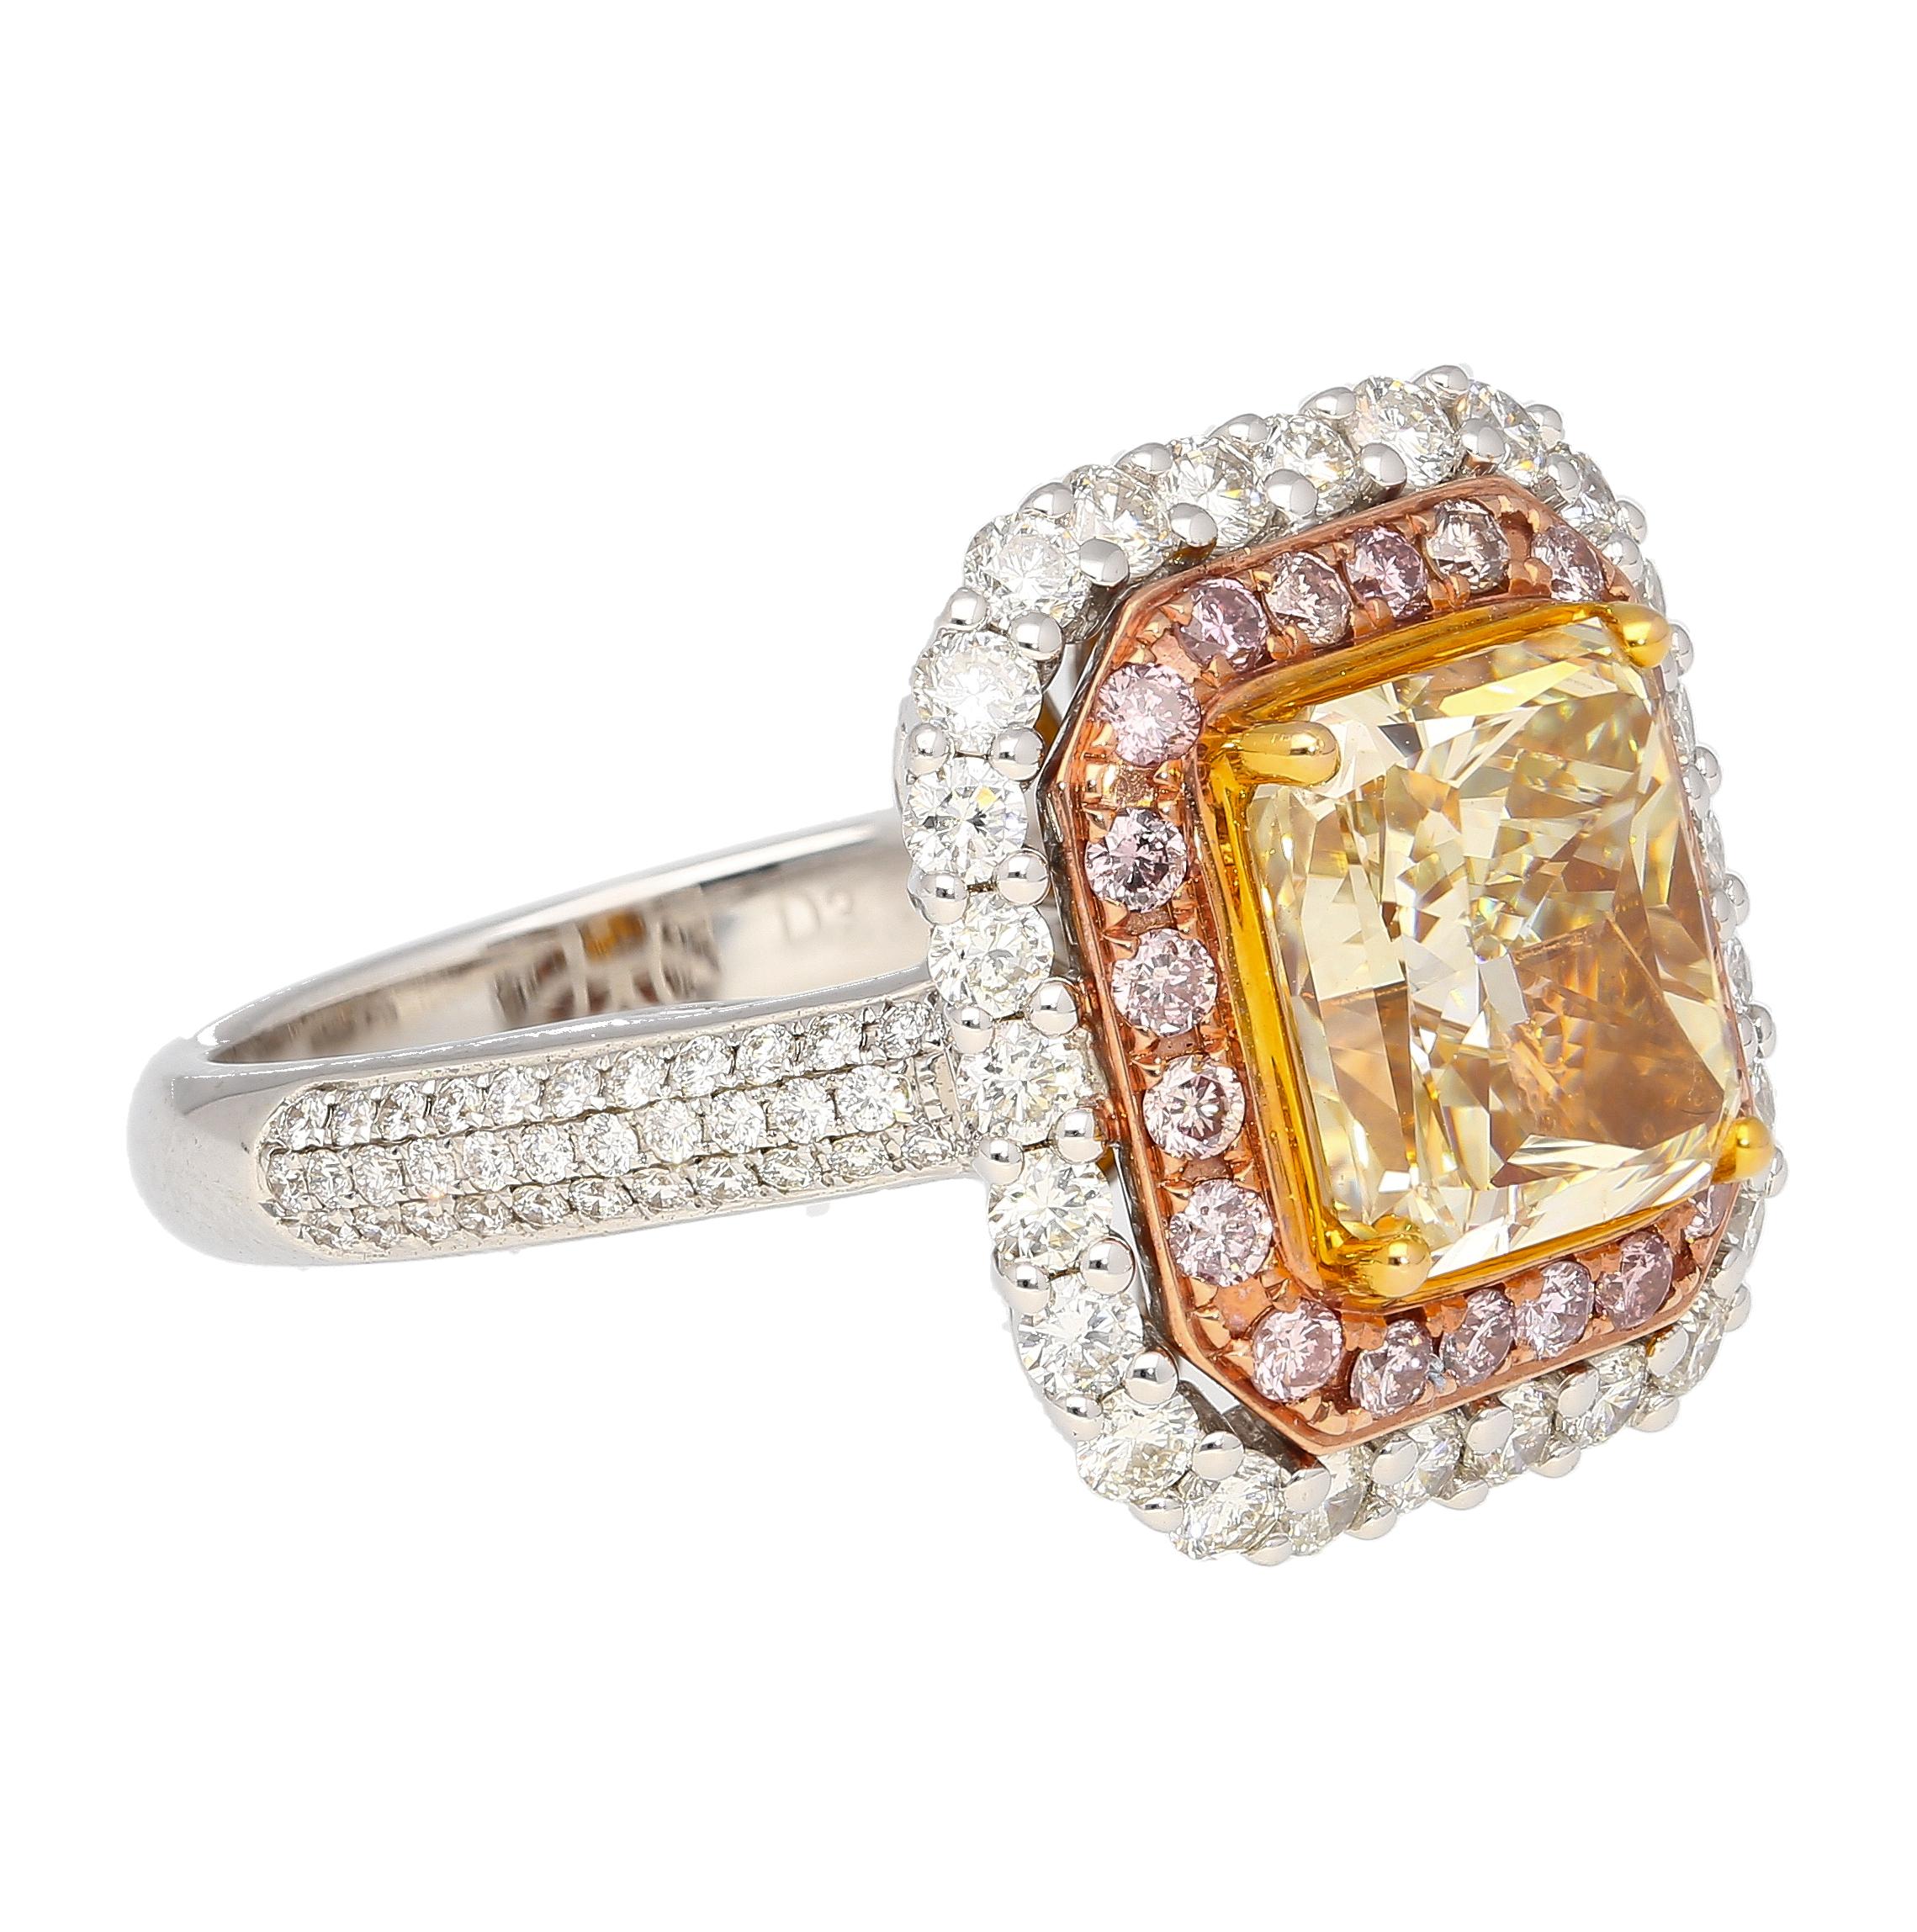 GIA Cert 3.51 Carat Brownish Yellow Diamond Ring with Pink & White Diamond Halo In New Condition For Sale In Miami, FL